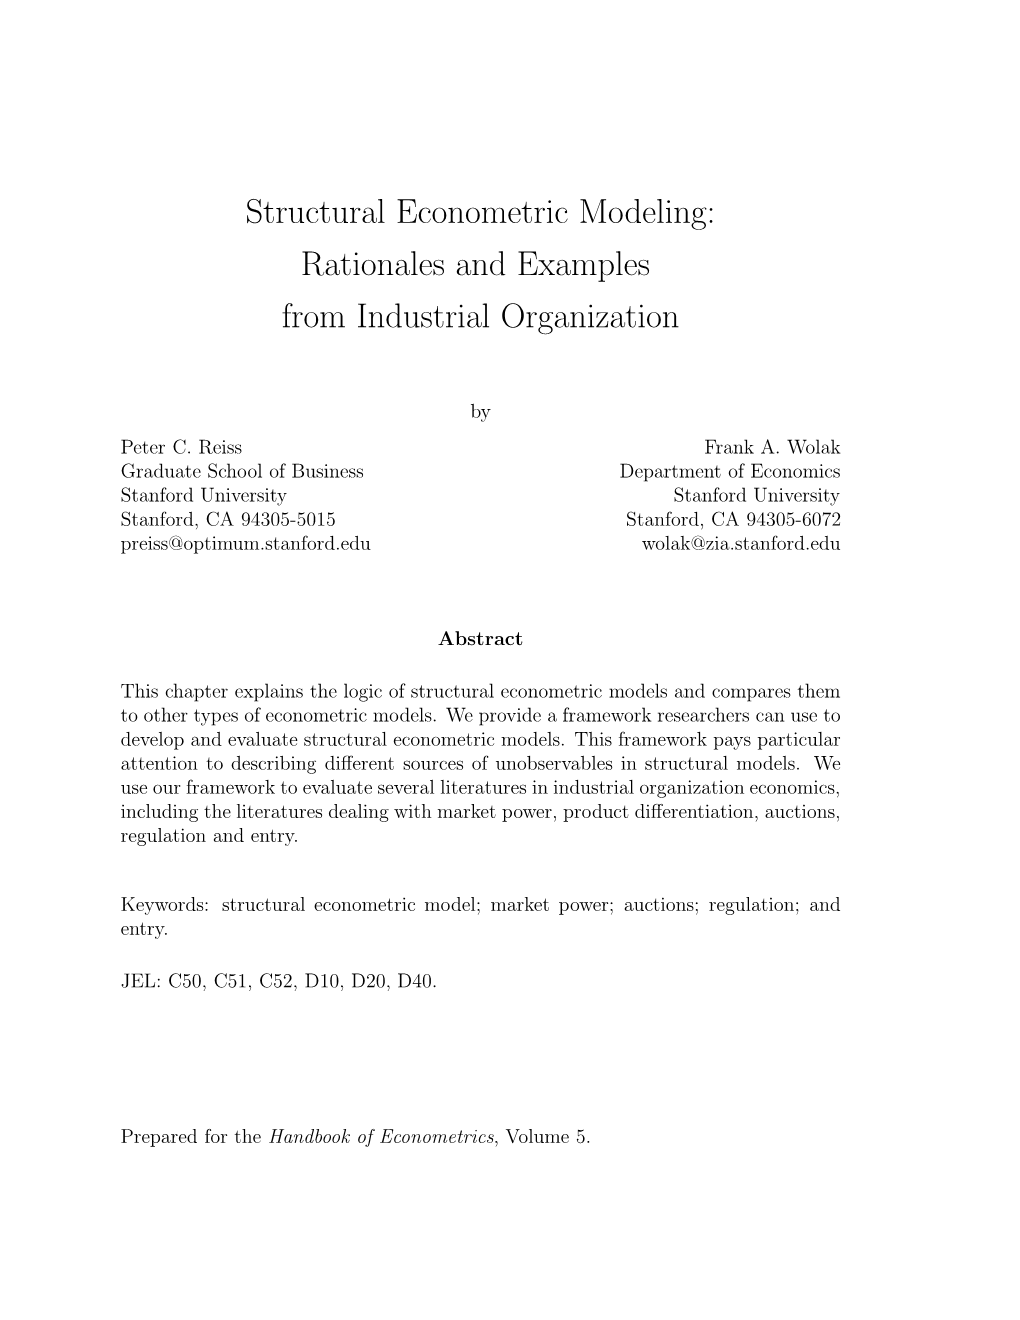 Structural Econometric Modeling: Rationales and Examples from Industrial Organization